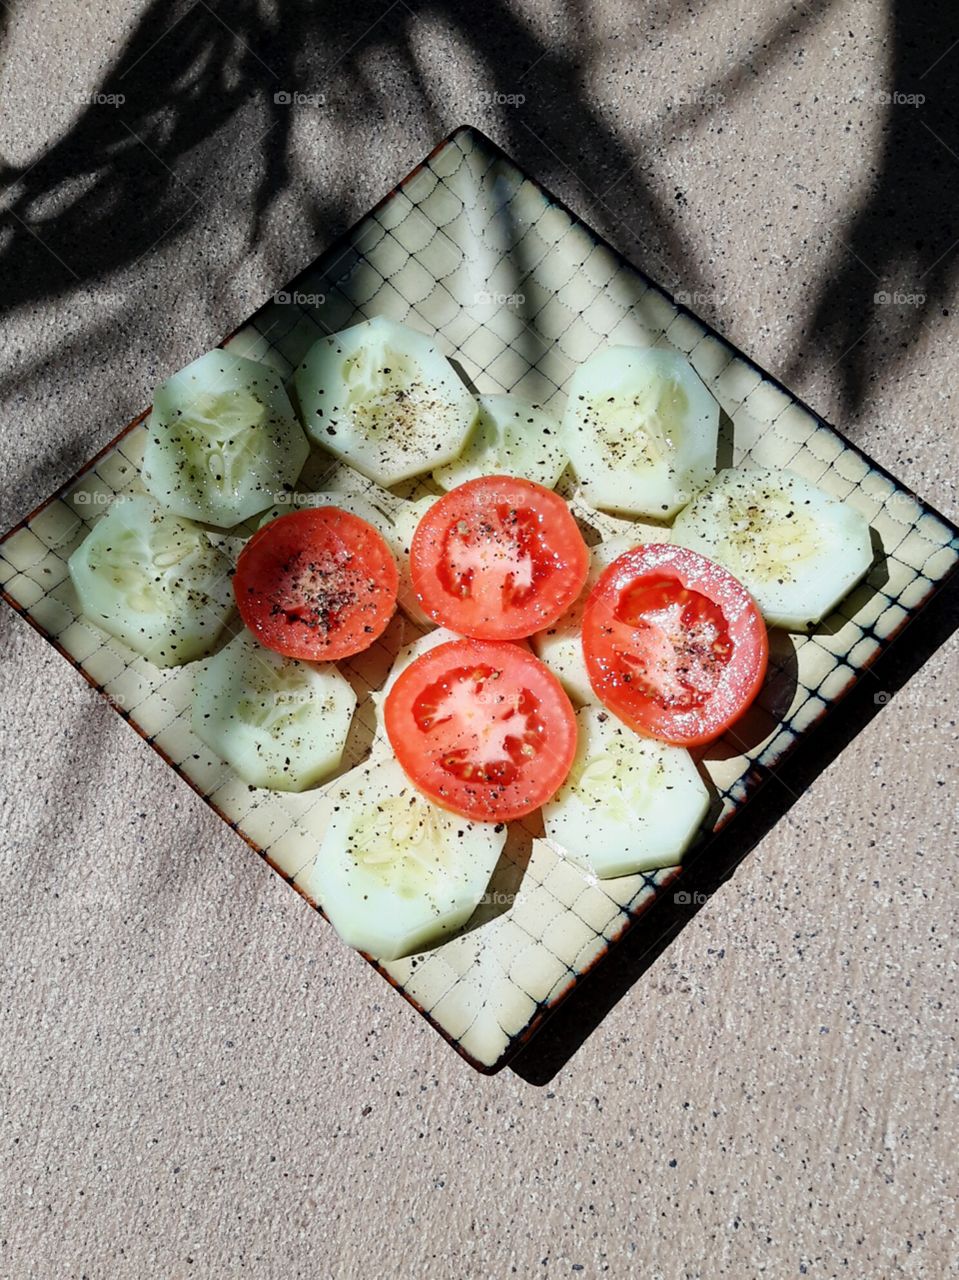 Sliced cucumber and tomato salad with fresh ground pepper